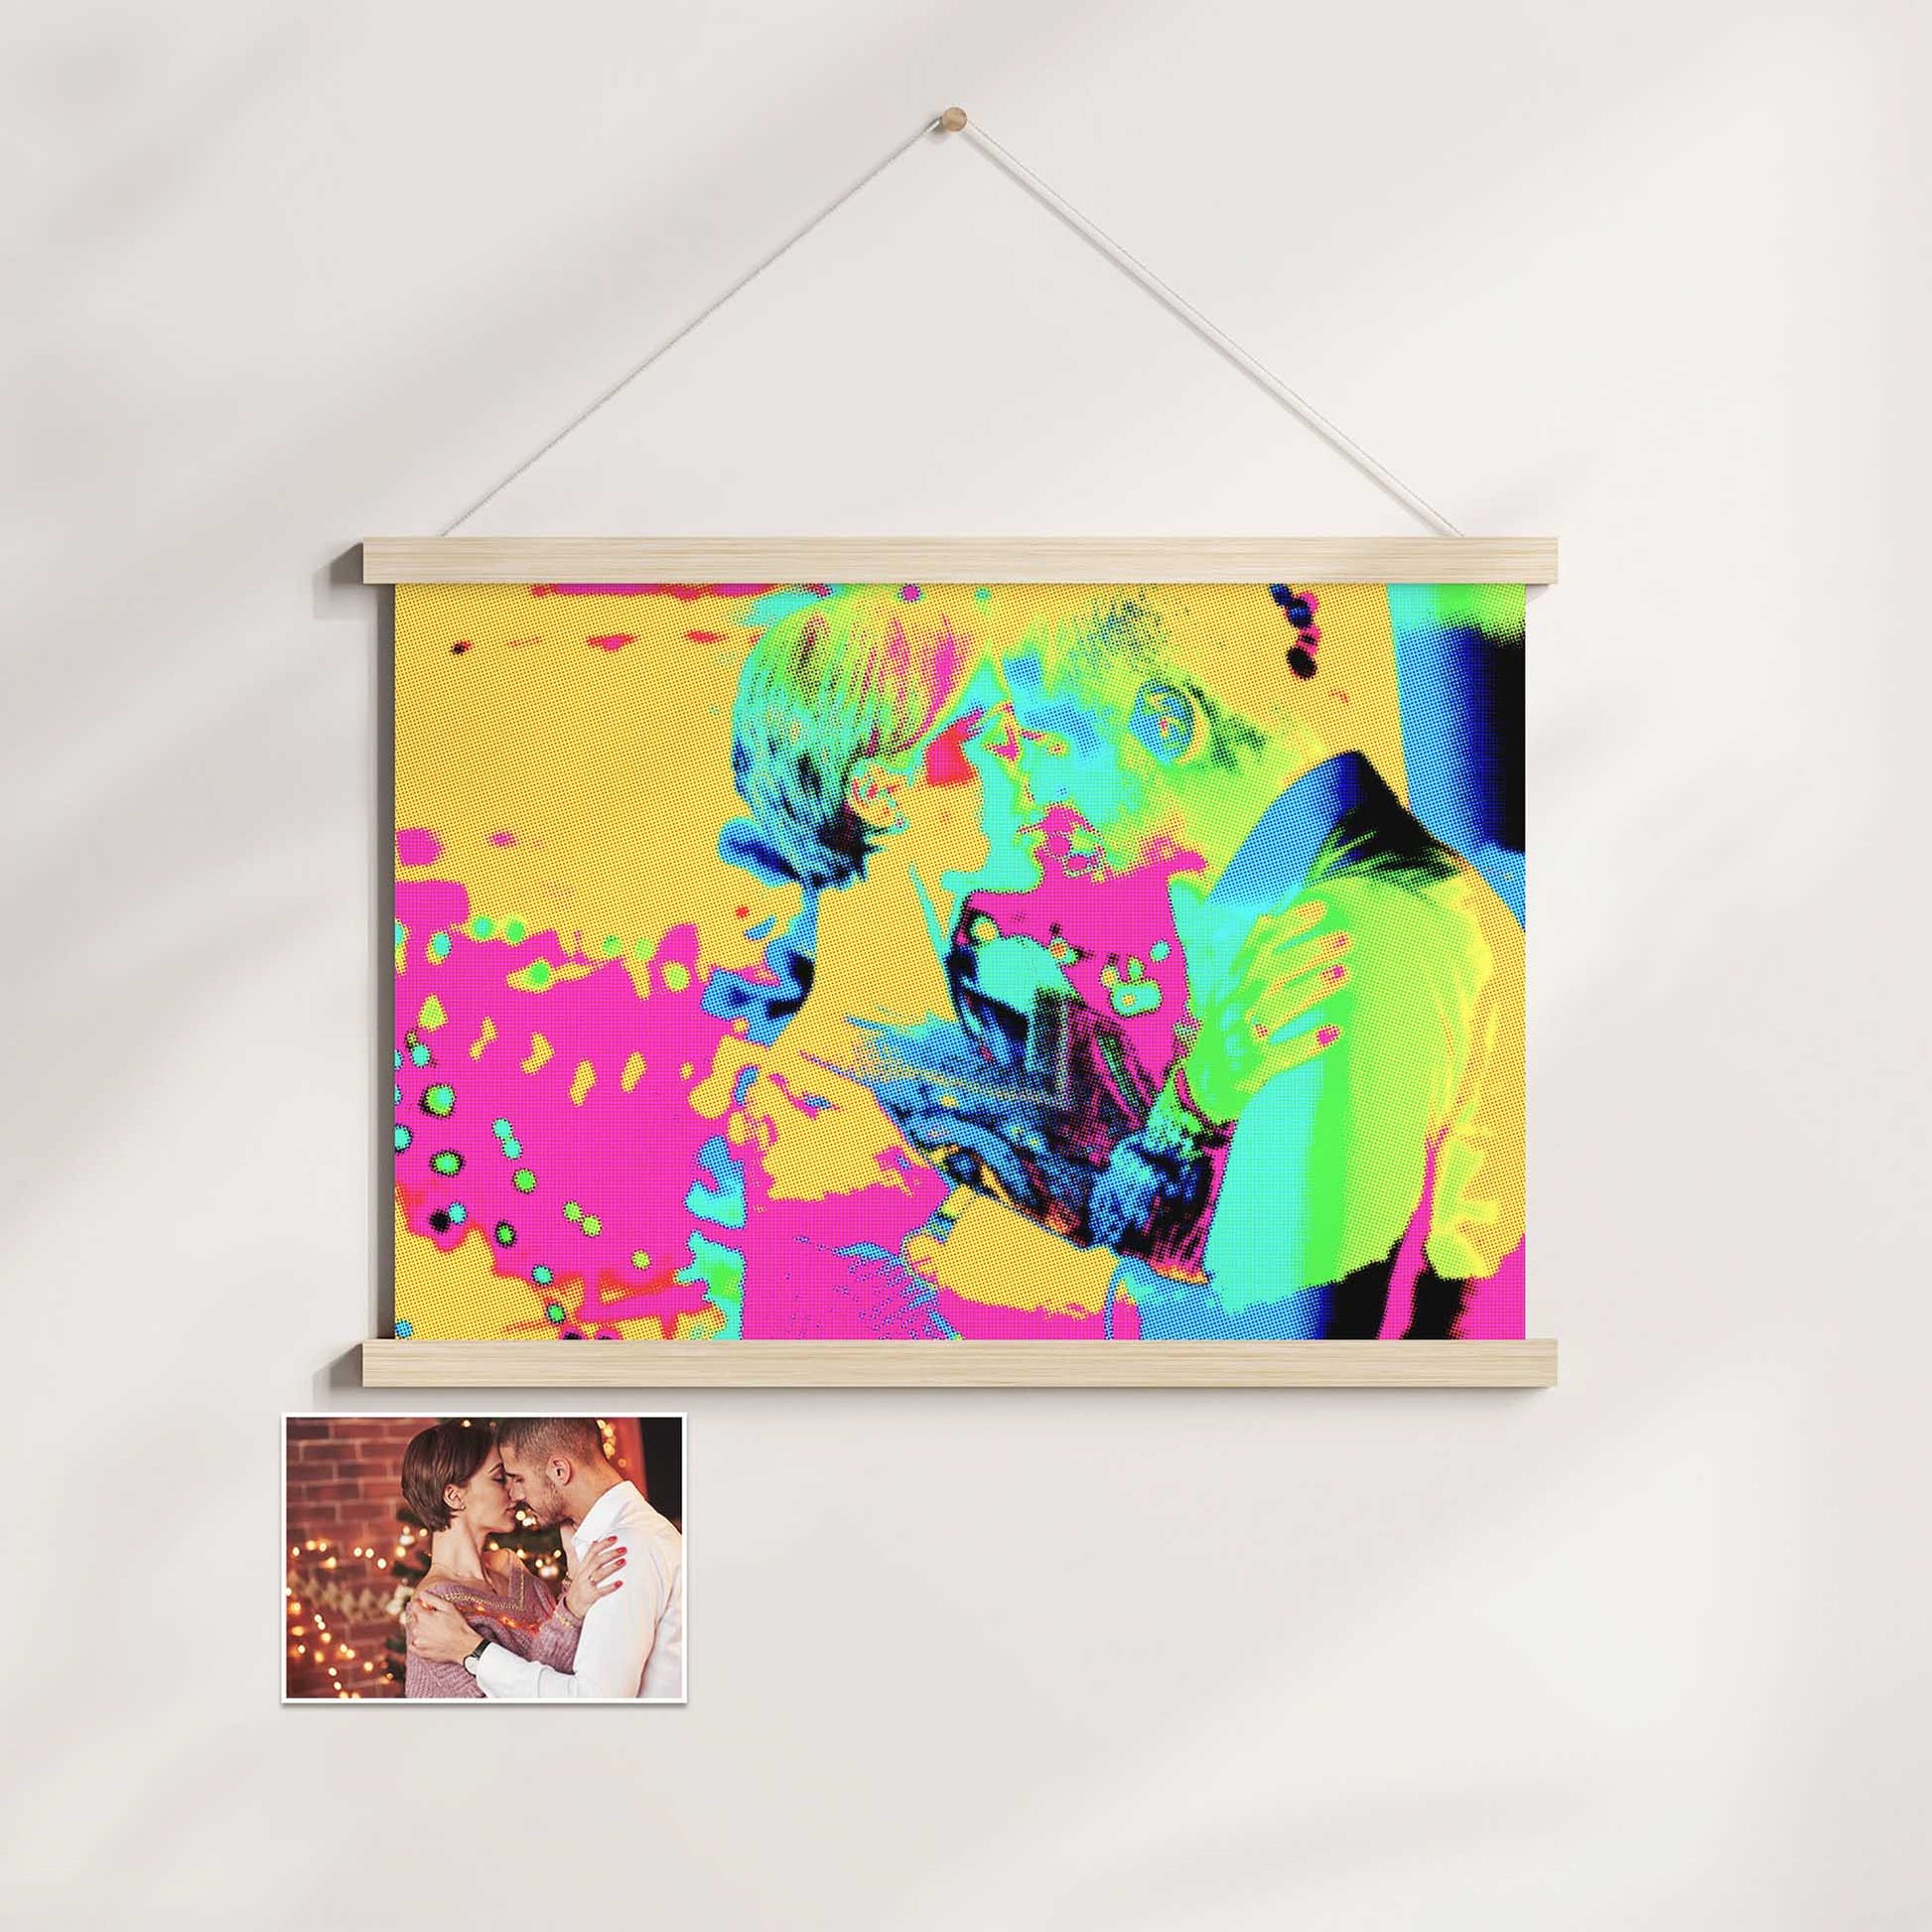 Experience the joy and creativity of the Personalised Graffiti Street Art Poster Hanger. Its cool graffiti style and street art filter bring a unique and vibrant atmosphere to your space. Made with high-quality materials